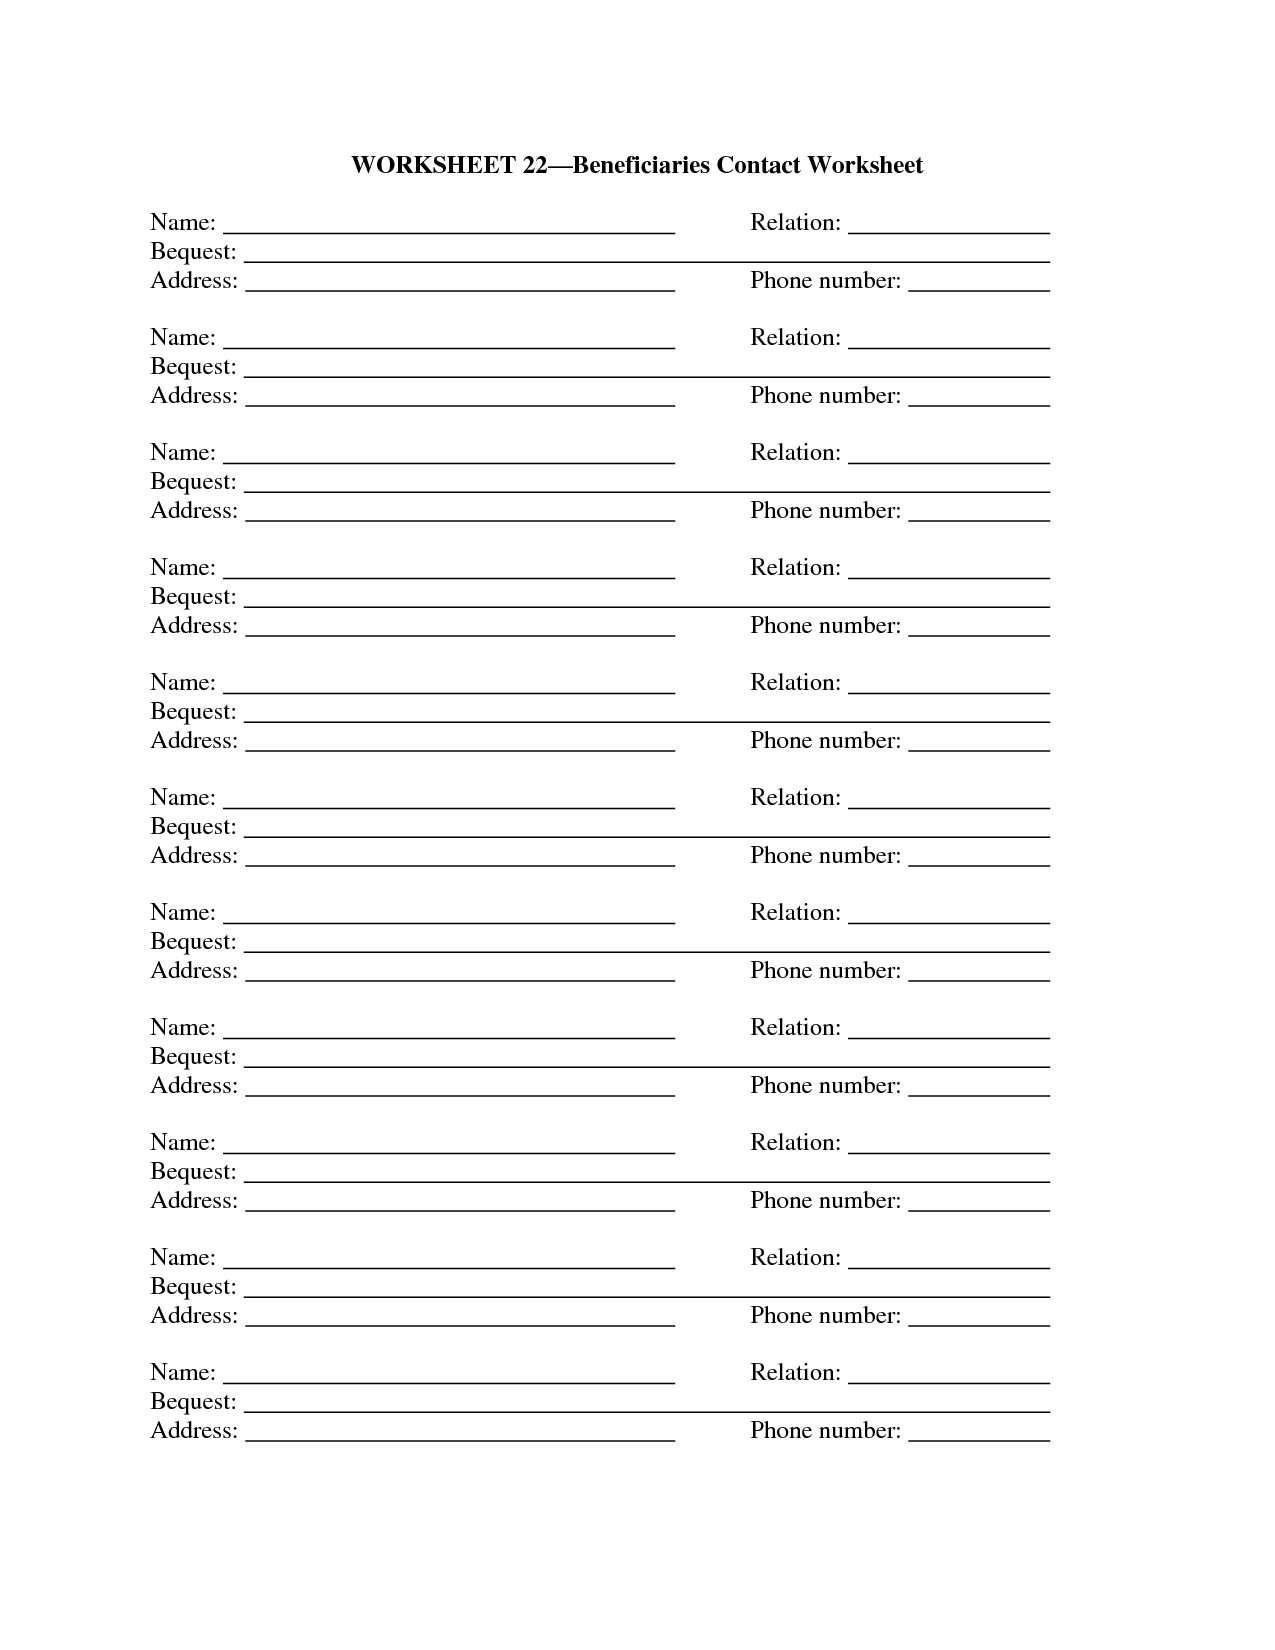 14-best-images-of-telephone-number-worksheet-learning-phone-number